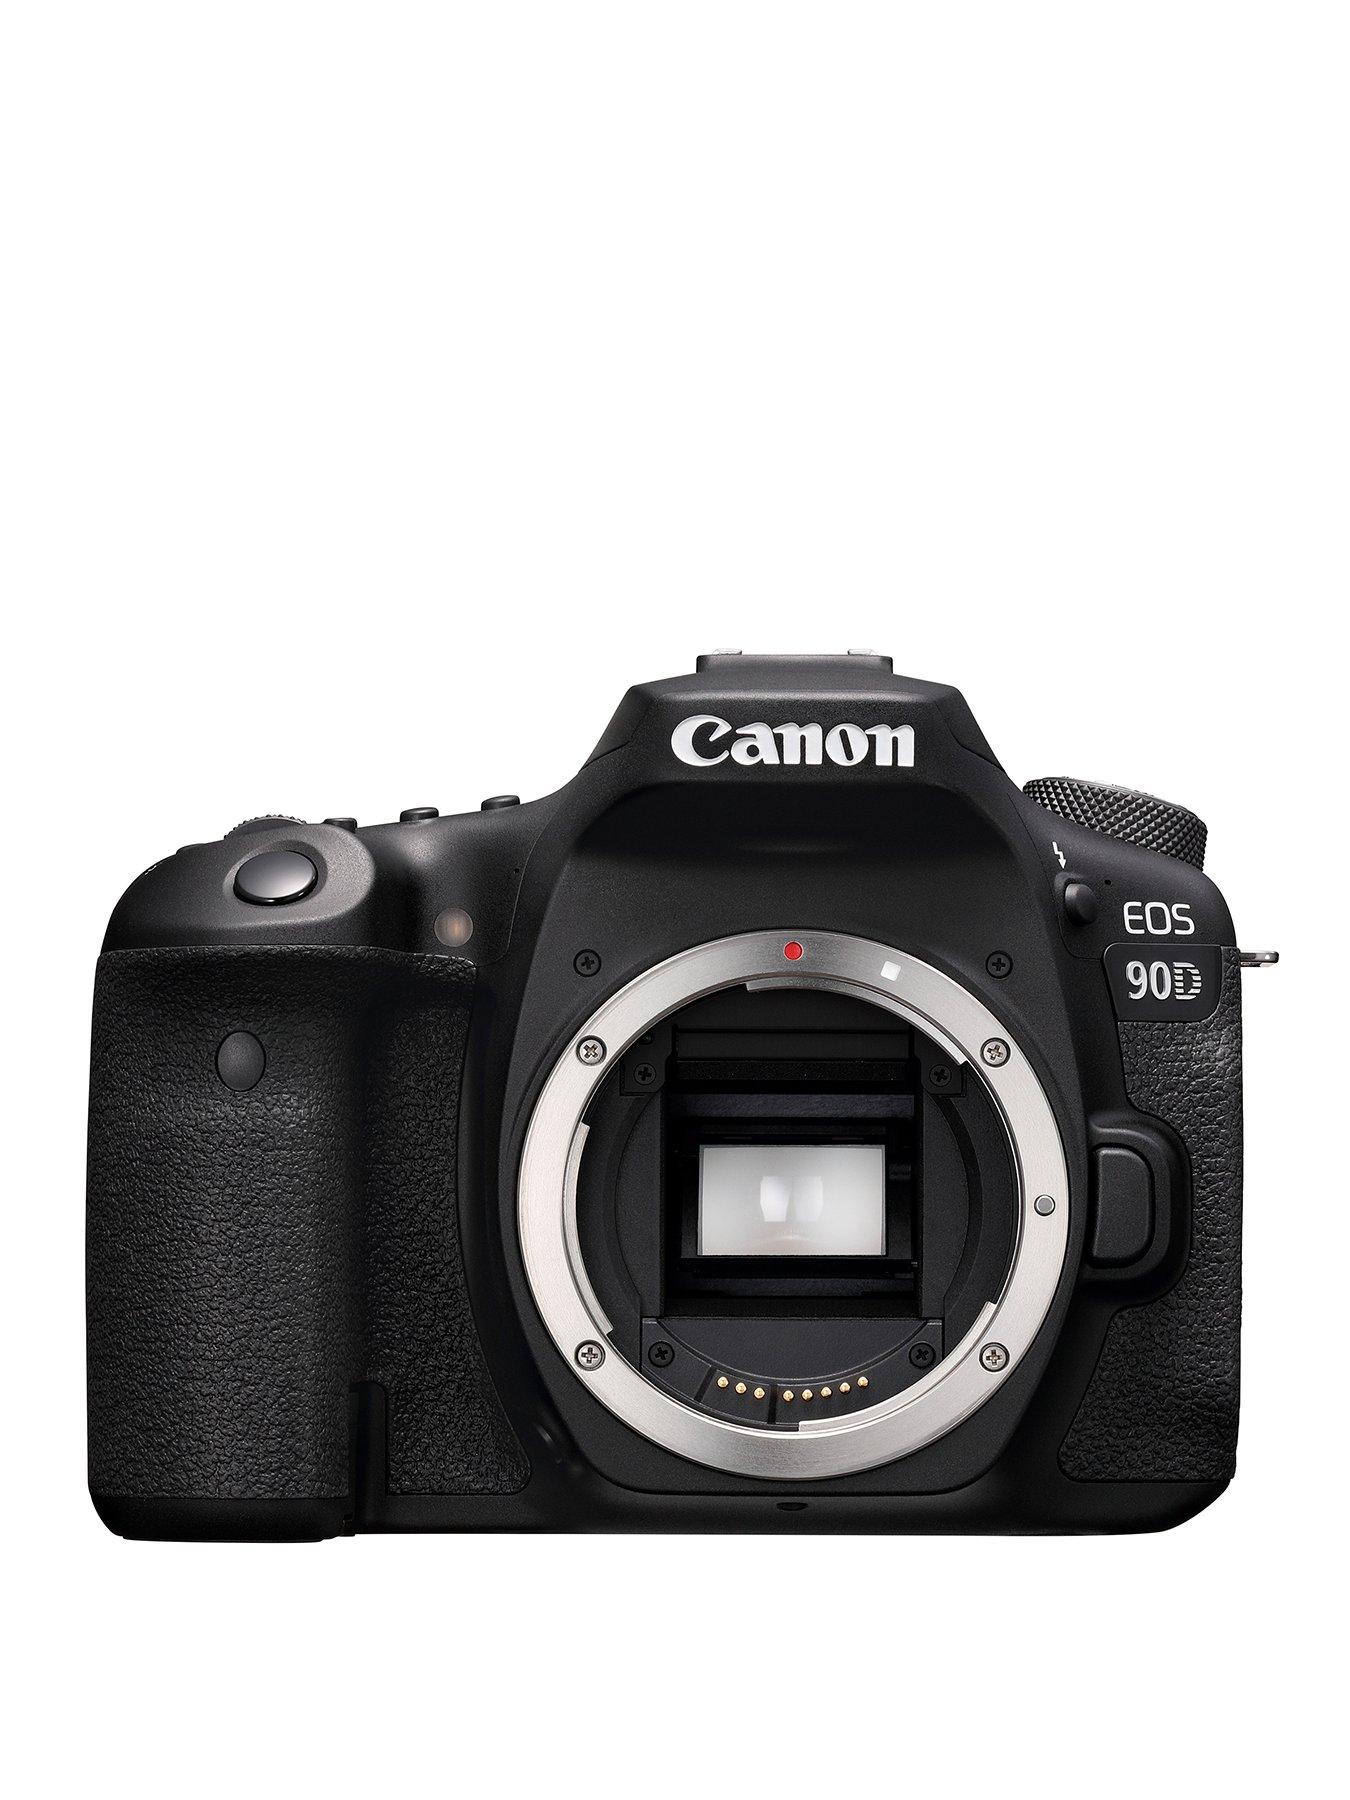 User manual Canon EOS 250D (English - 495 pages)